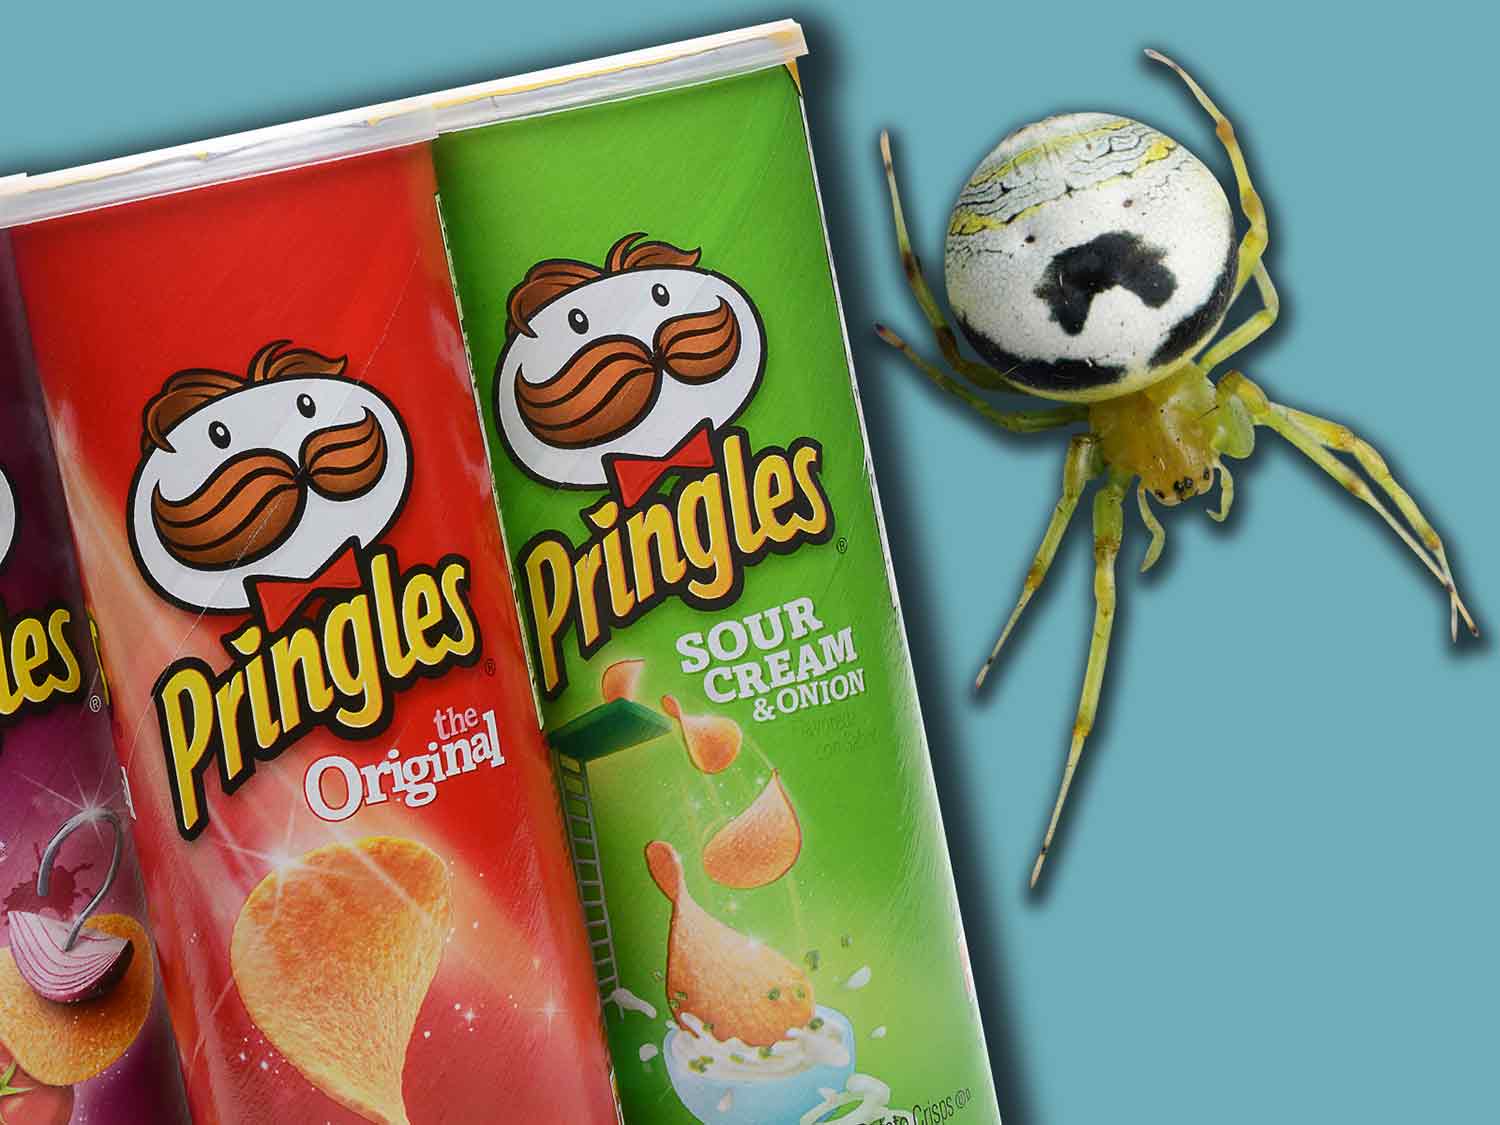 A kidney garden spider sits next to cans of Pringles potato chips